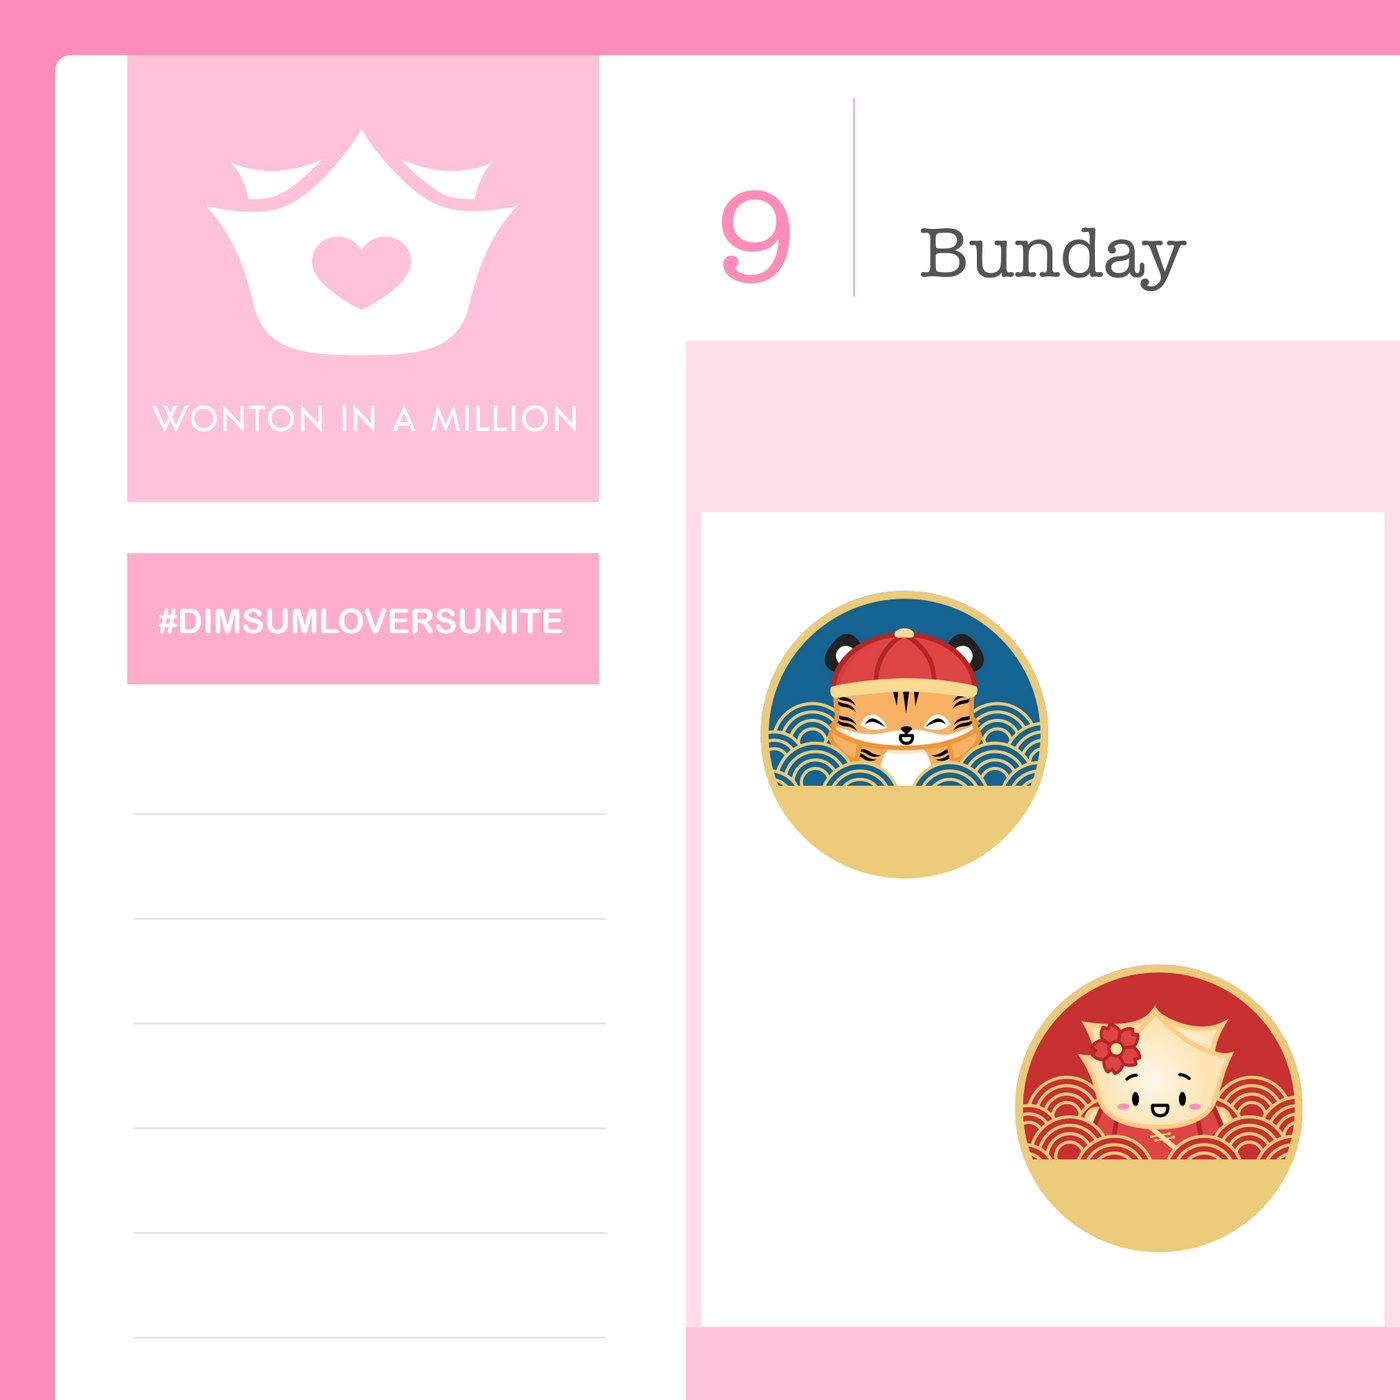 S175a | Lunar New Year Year Of The Tiger Advent Countdown Stickers